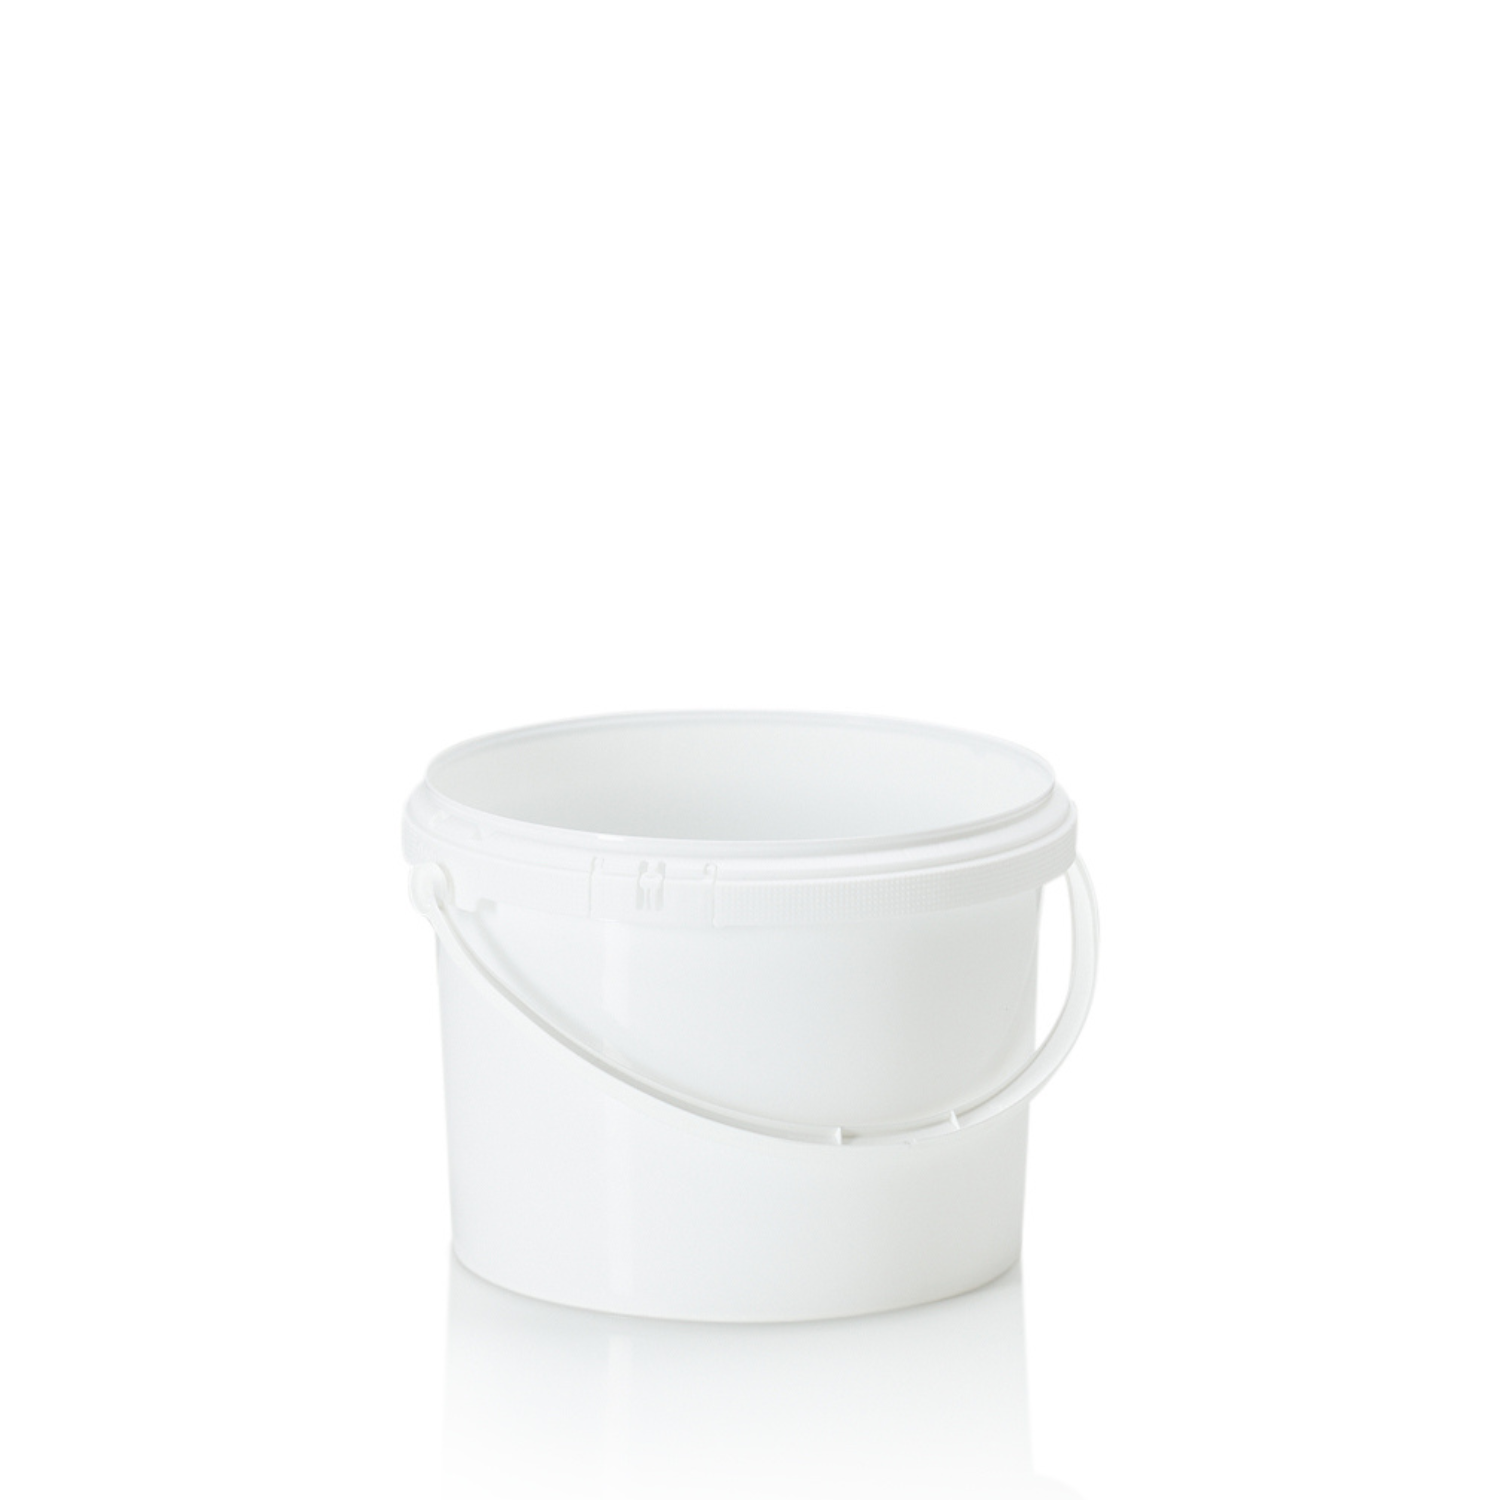 4.3ltr White PP Tamper Evident Pail with Plastic Handle